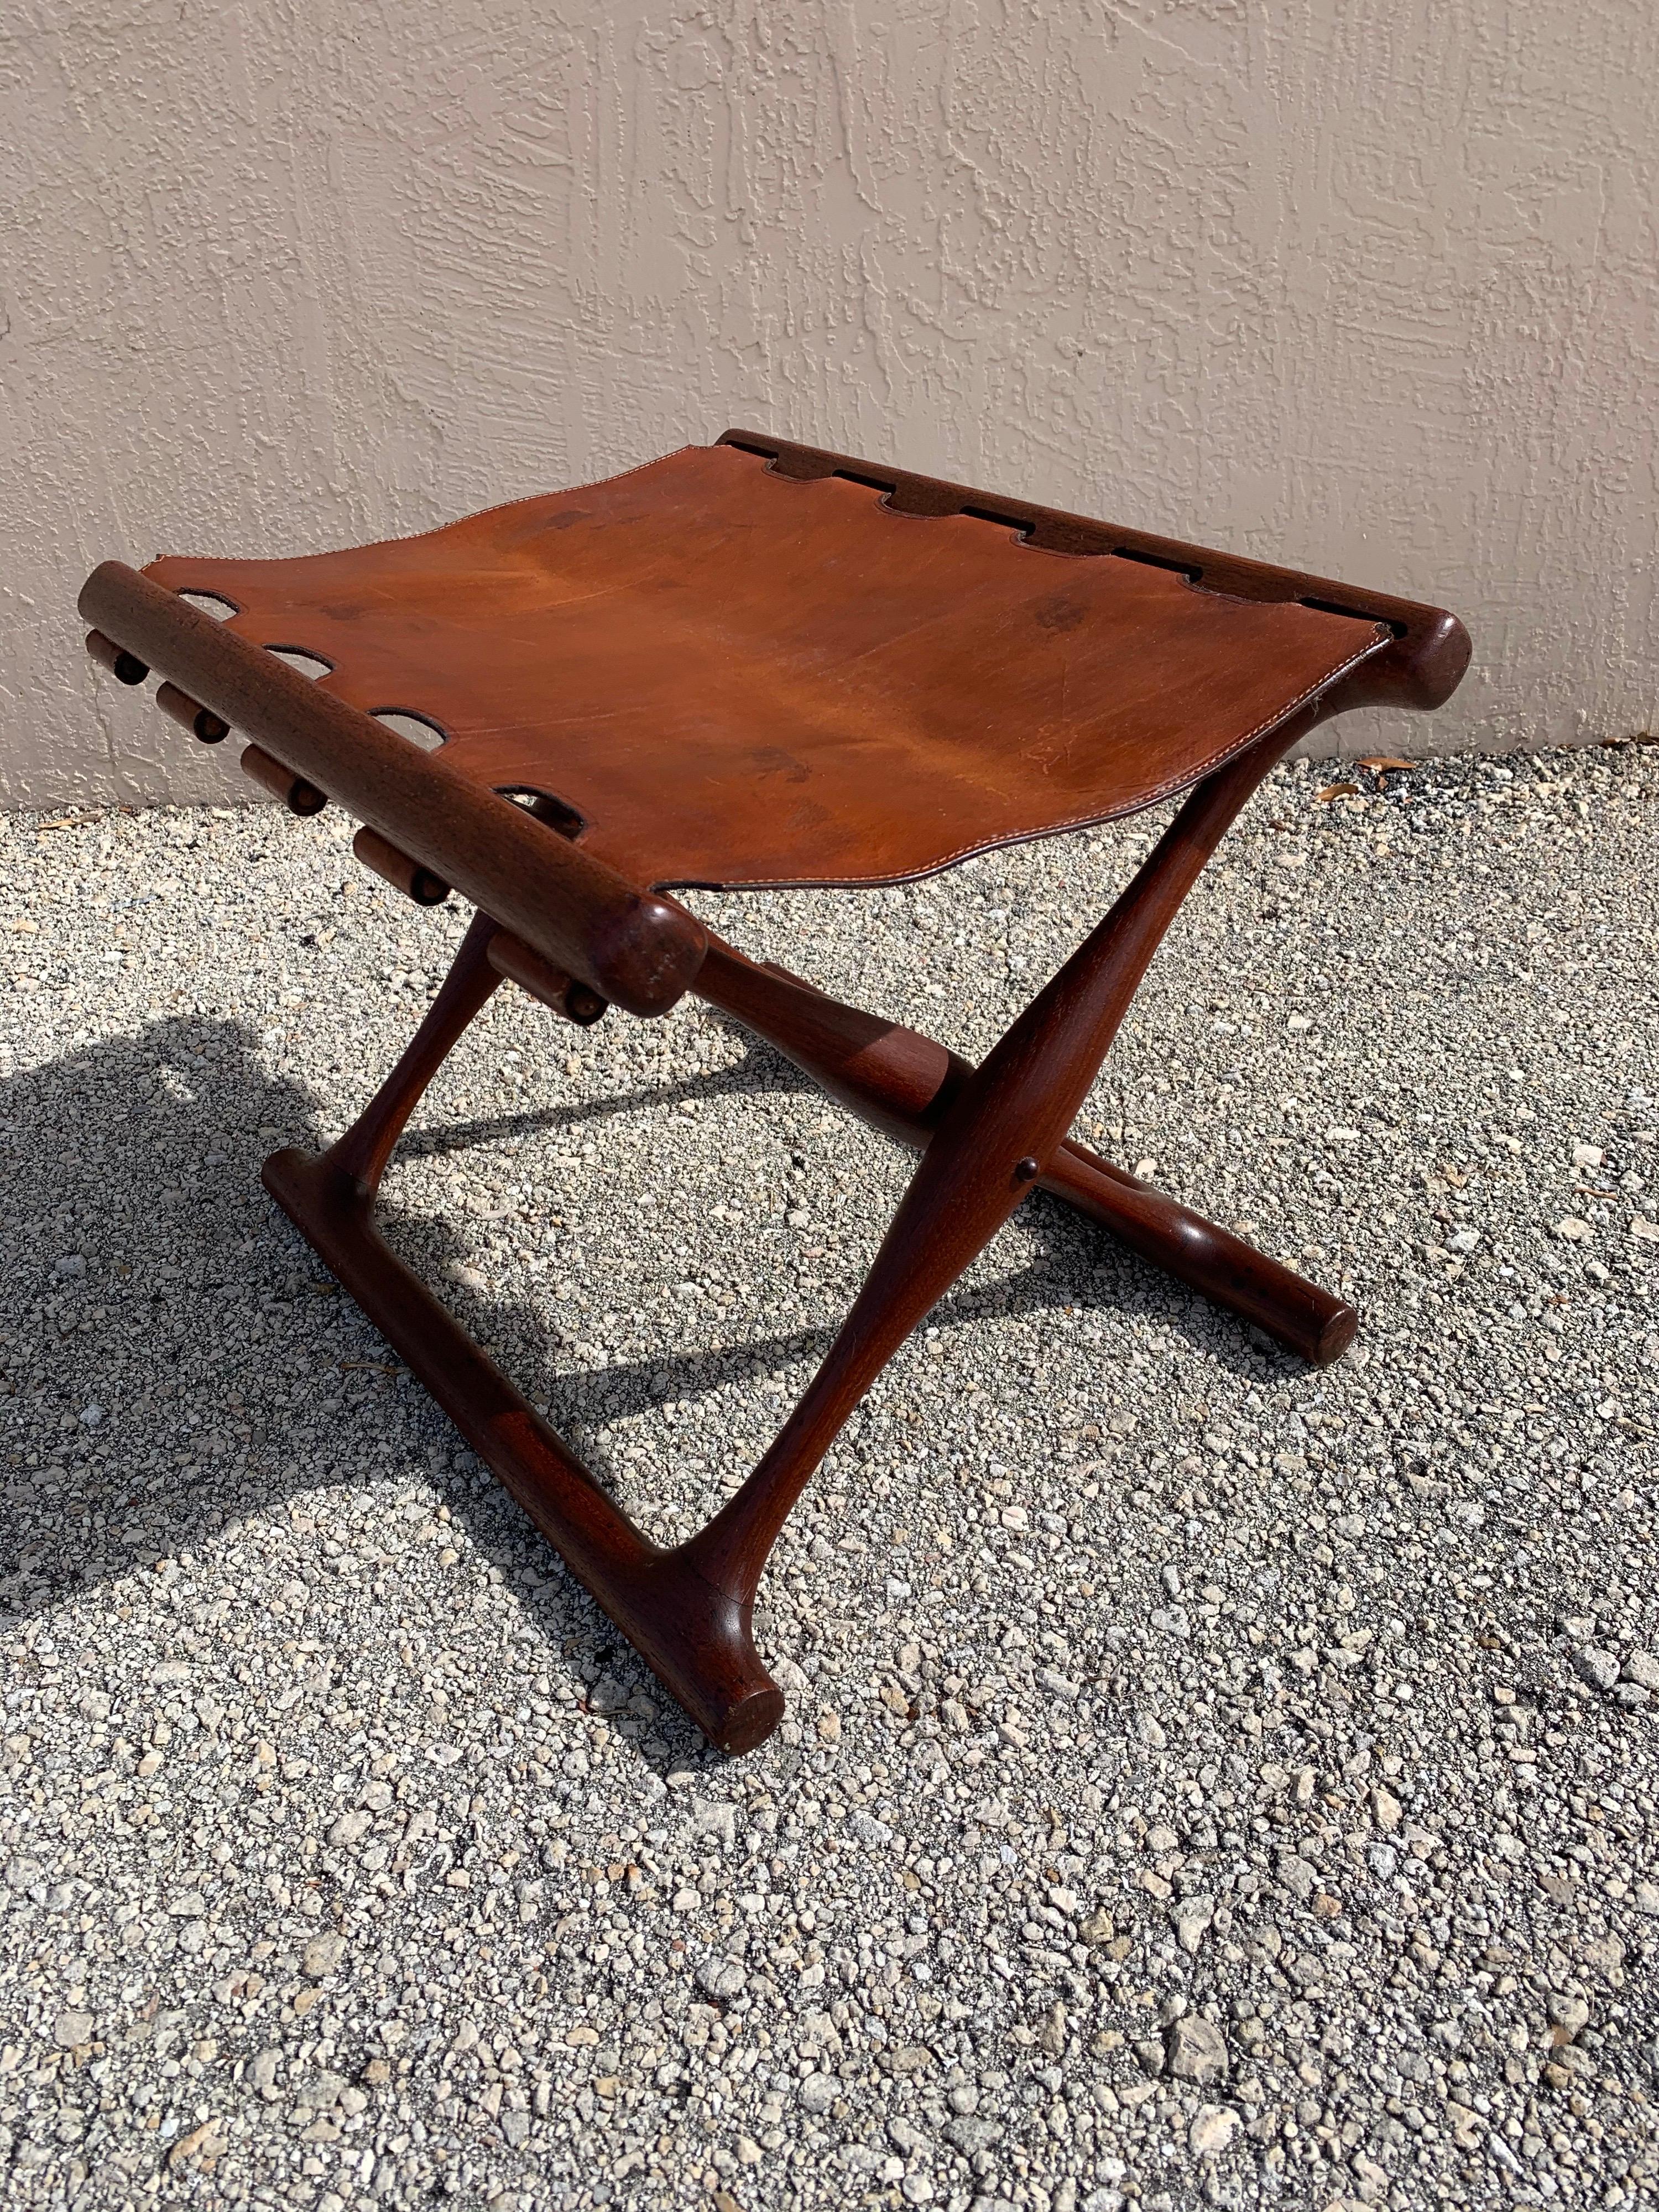 Mid-Century Modern Poul Hundevad Folding Stool in Brown Leather and Teak